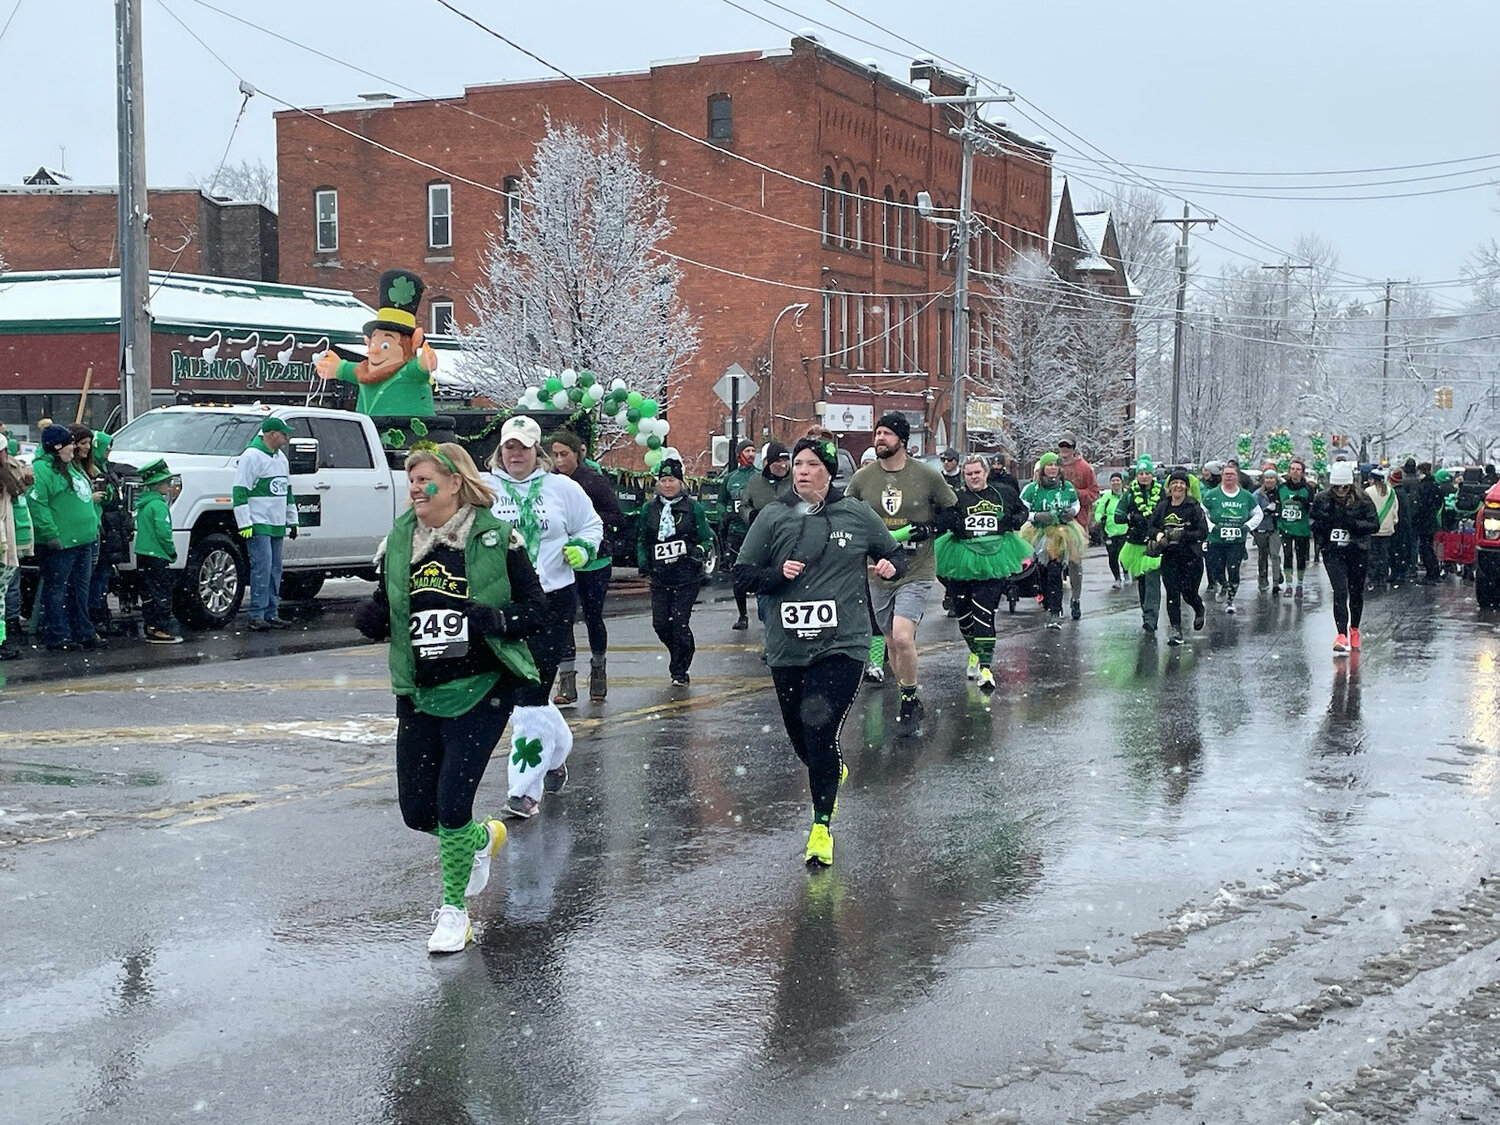 These runners are all smiles and in all green as they make their way down Genesee Street just before the start of the Utica St. Patrick's Day Parade on Saturday, March 11, 2023.